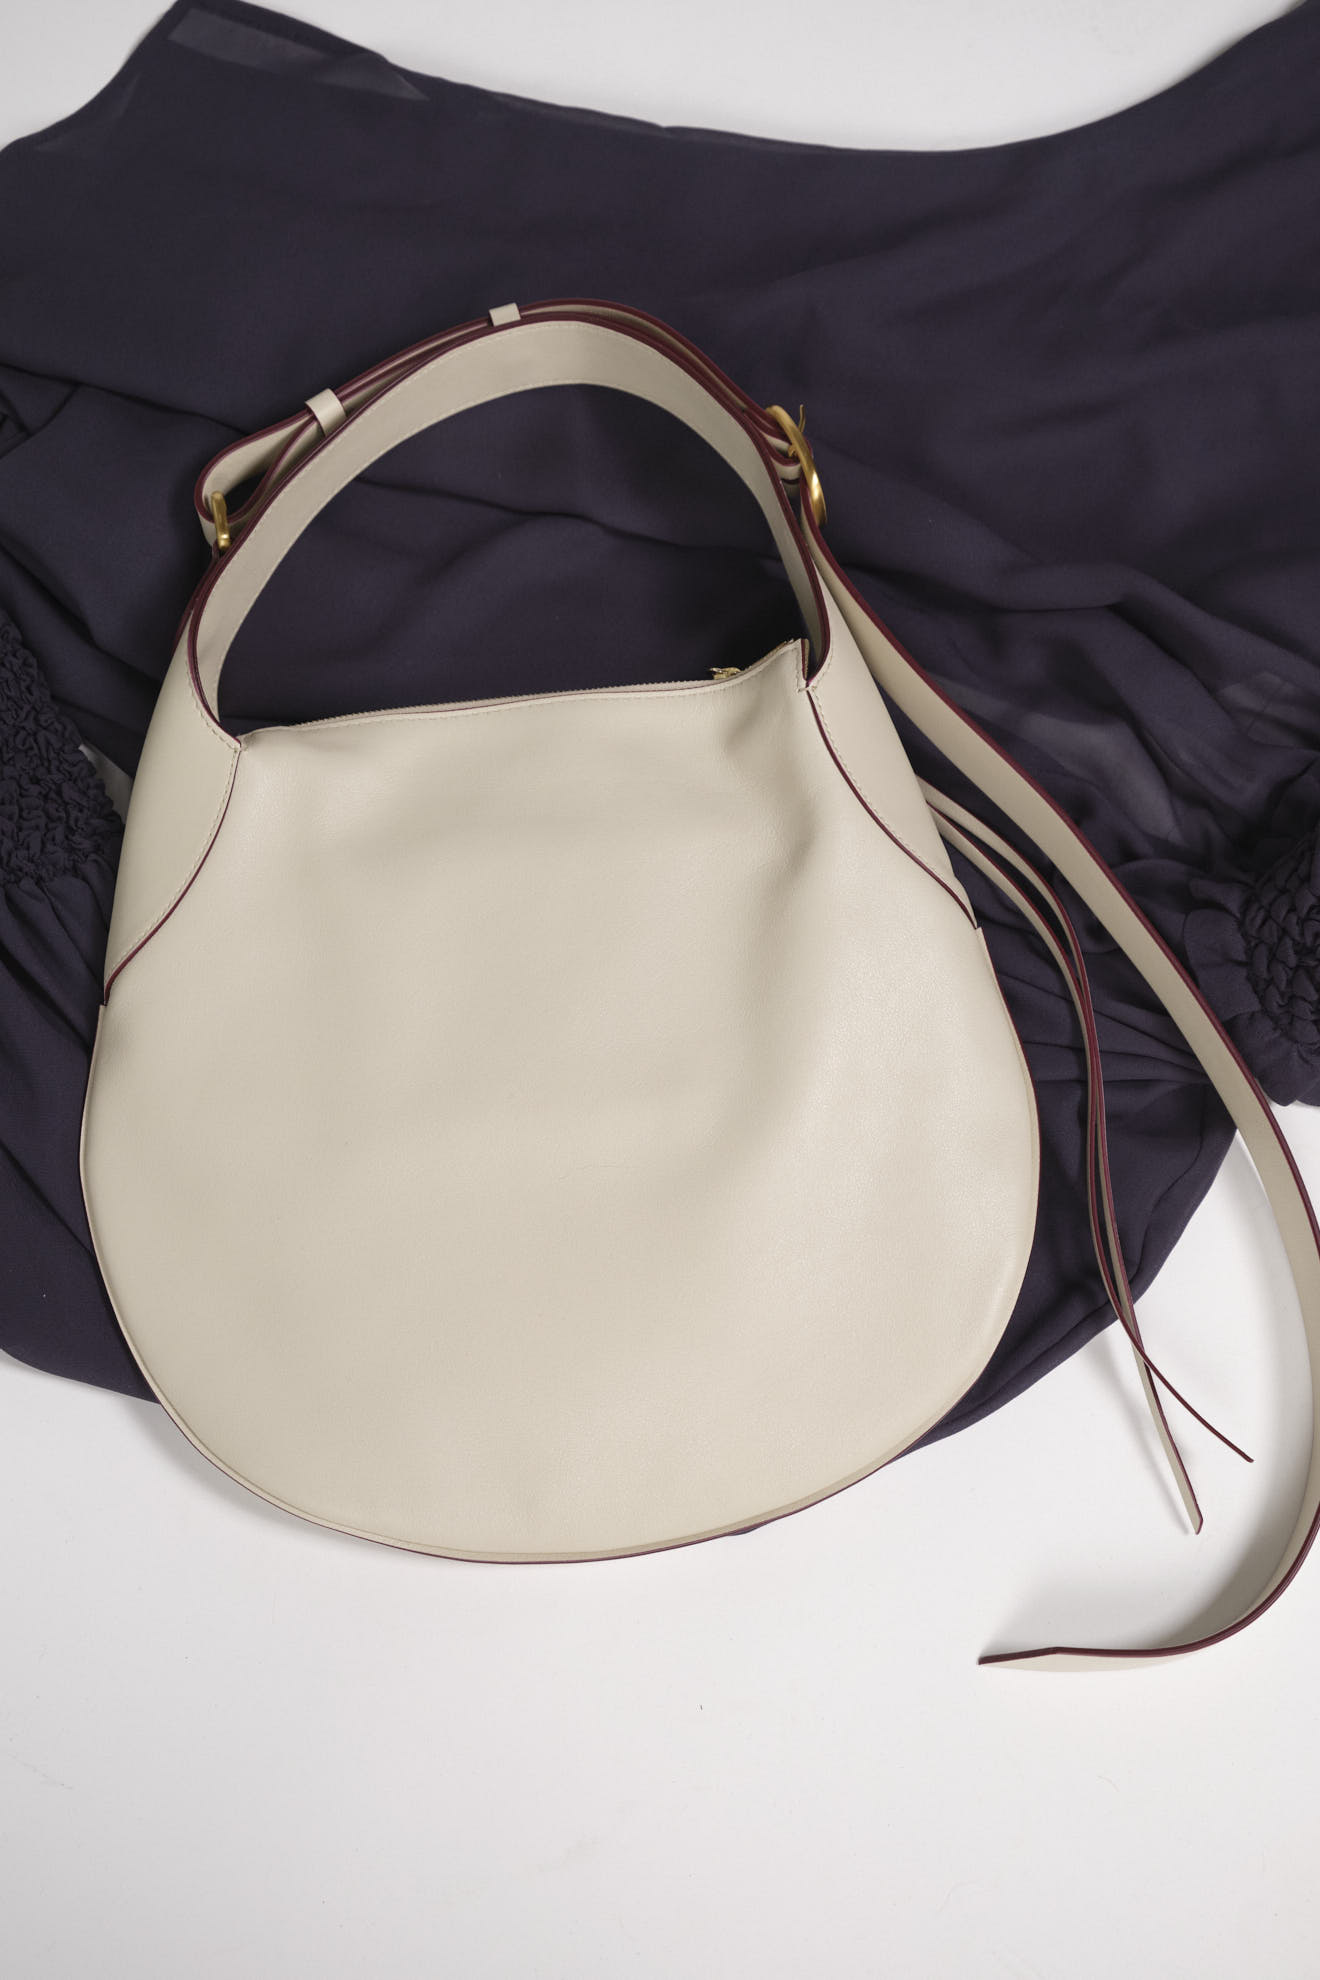 Victoria Beckham Small Hobo Moon white One Size